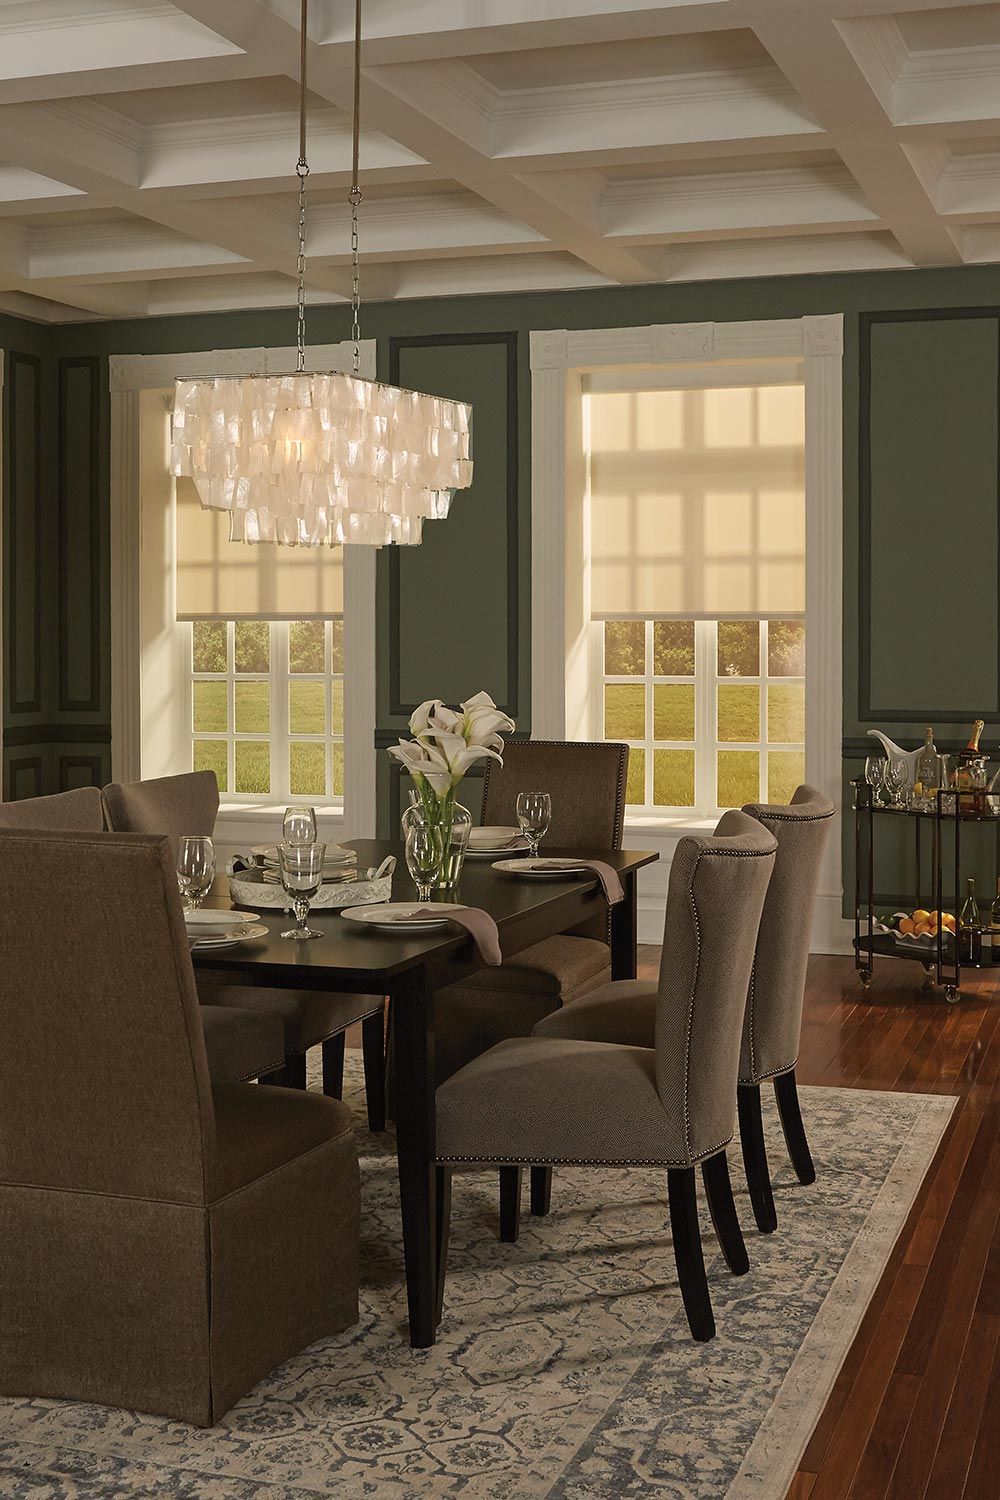 Lutron shades in a green and taupe dining room